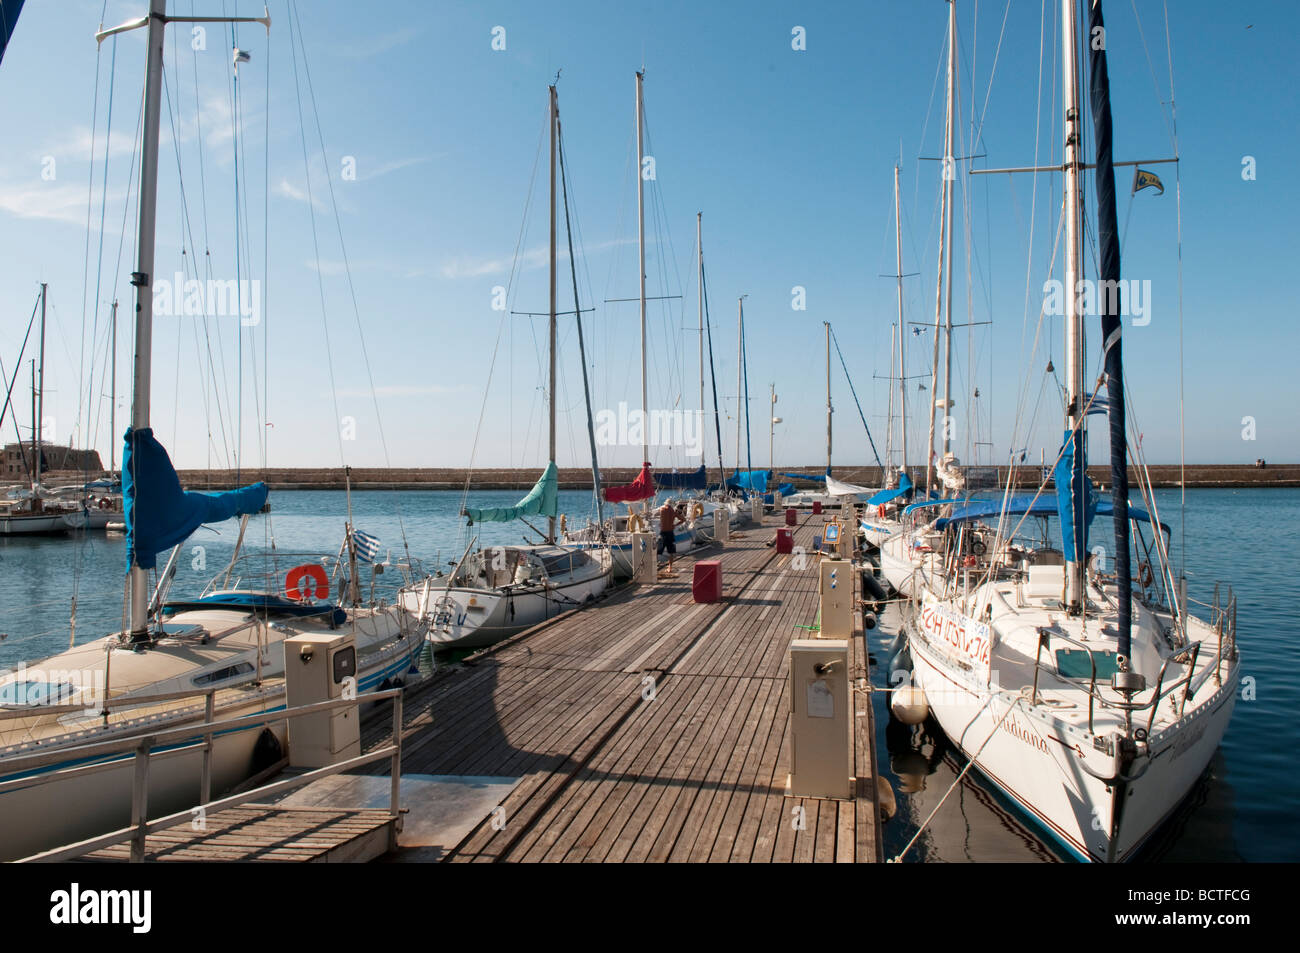 Yachts moored on the jetty at the Venetian harbour in Chania, Crete, Greece. Stock Photo